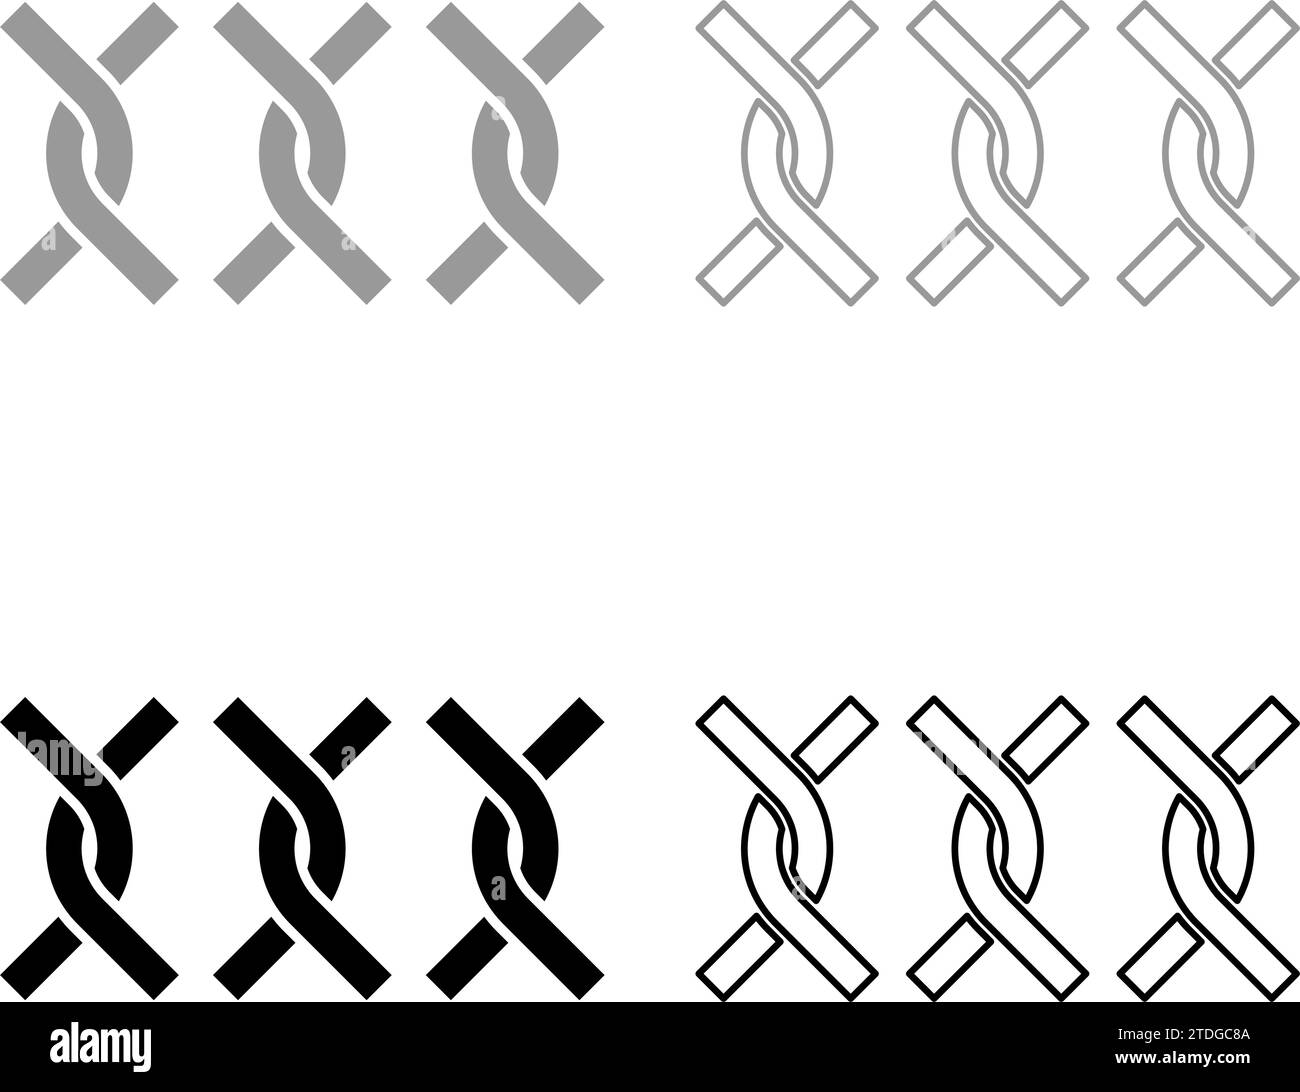 Chain fence twisted wire set icon grey black color vector illustration image simple solid fill outline contour line thin flat style Stock Vector